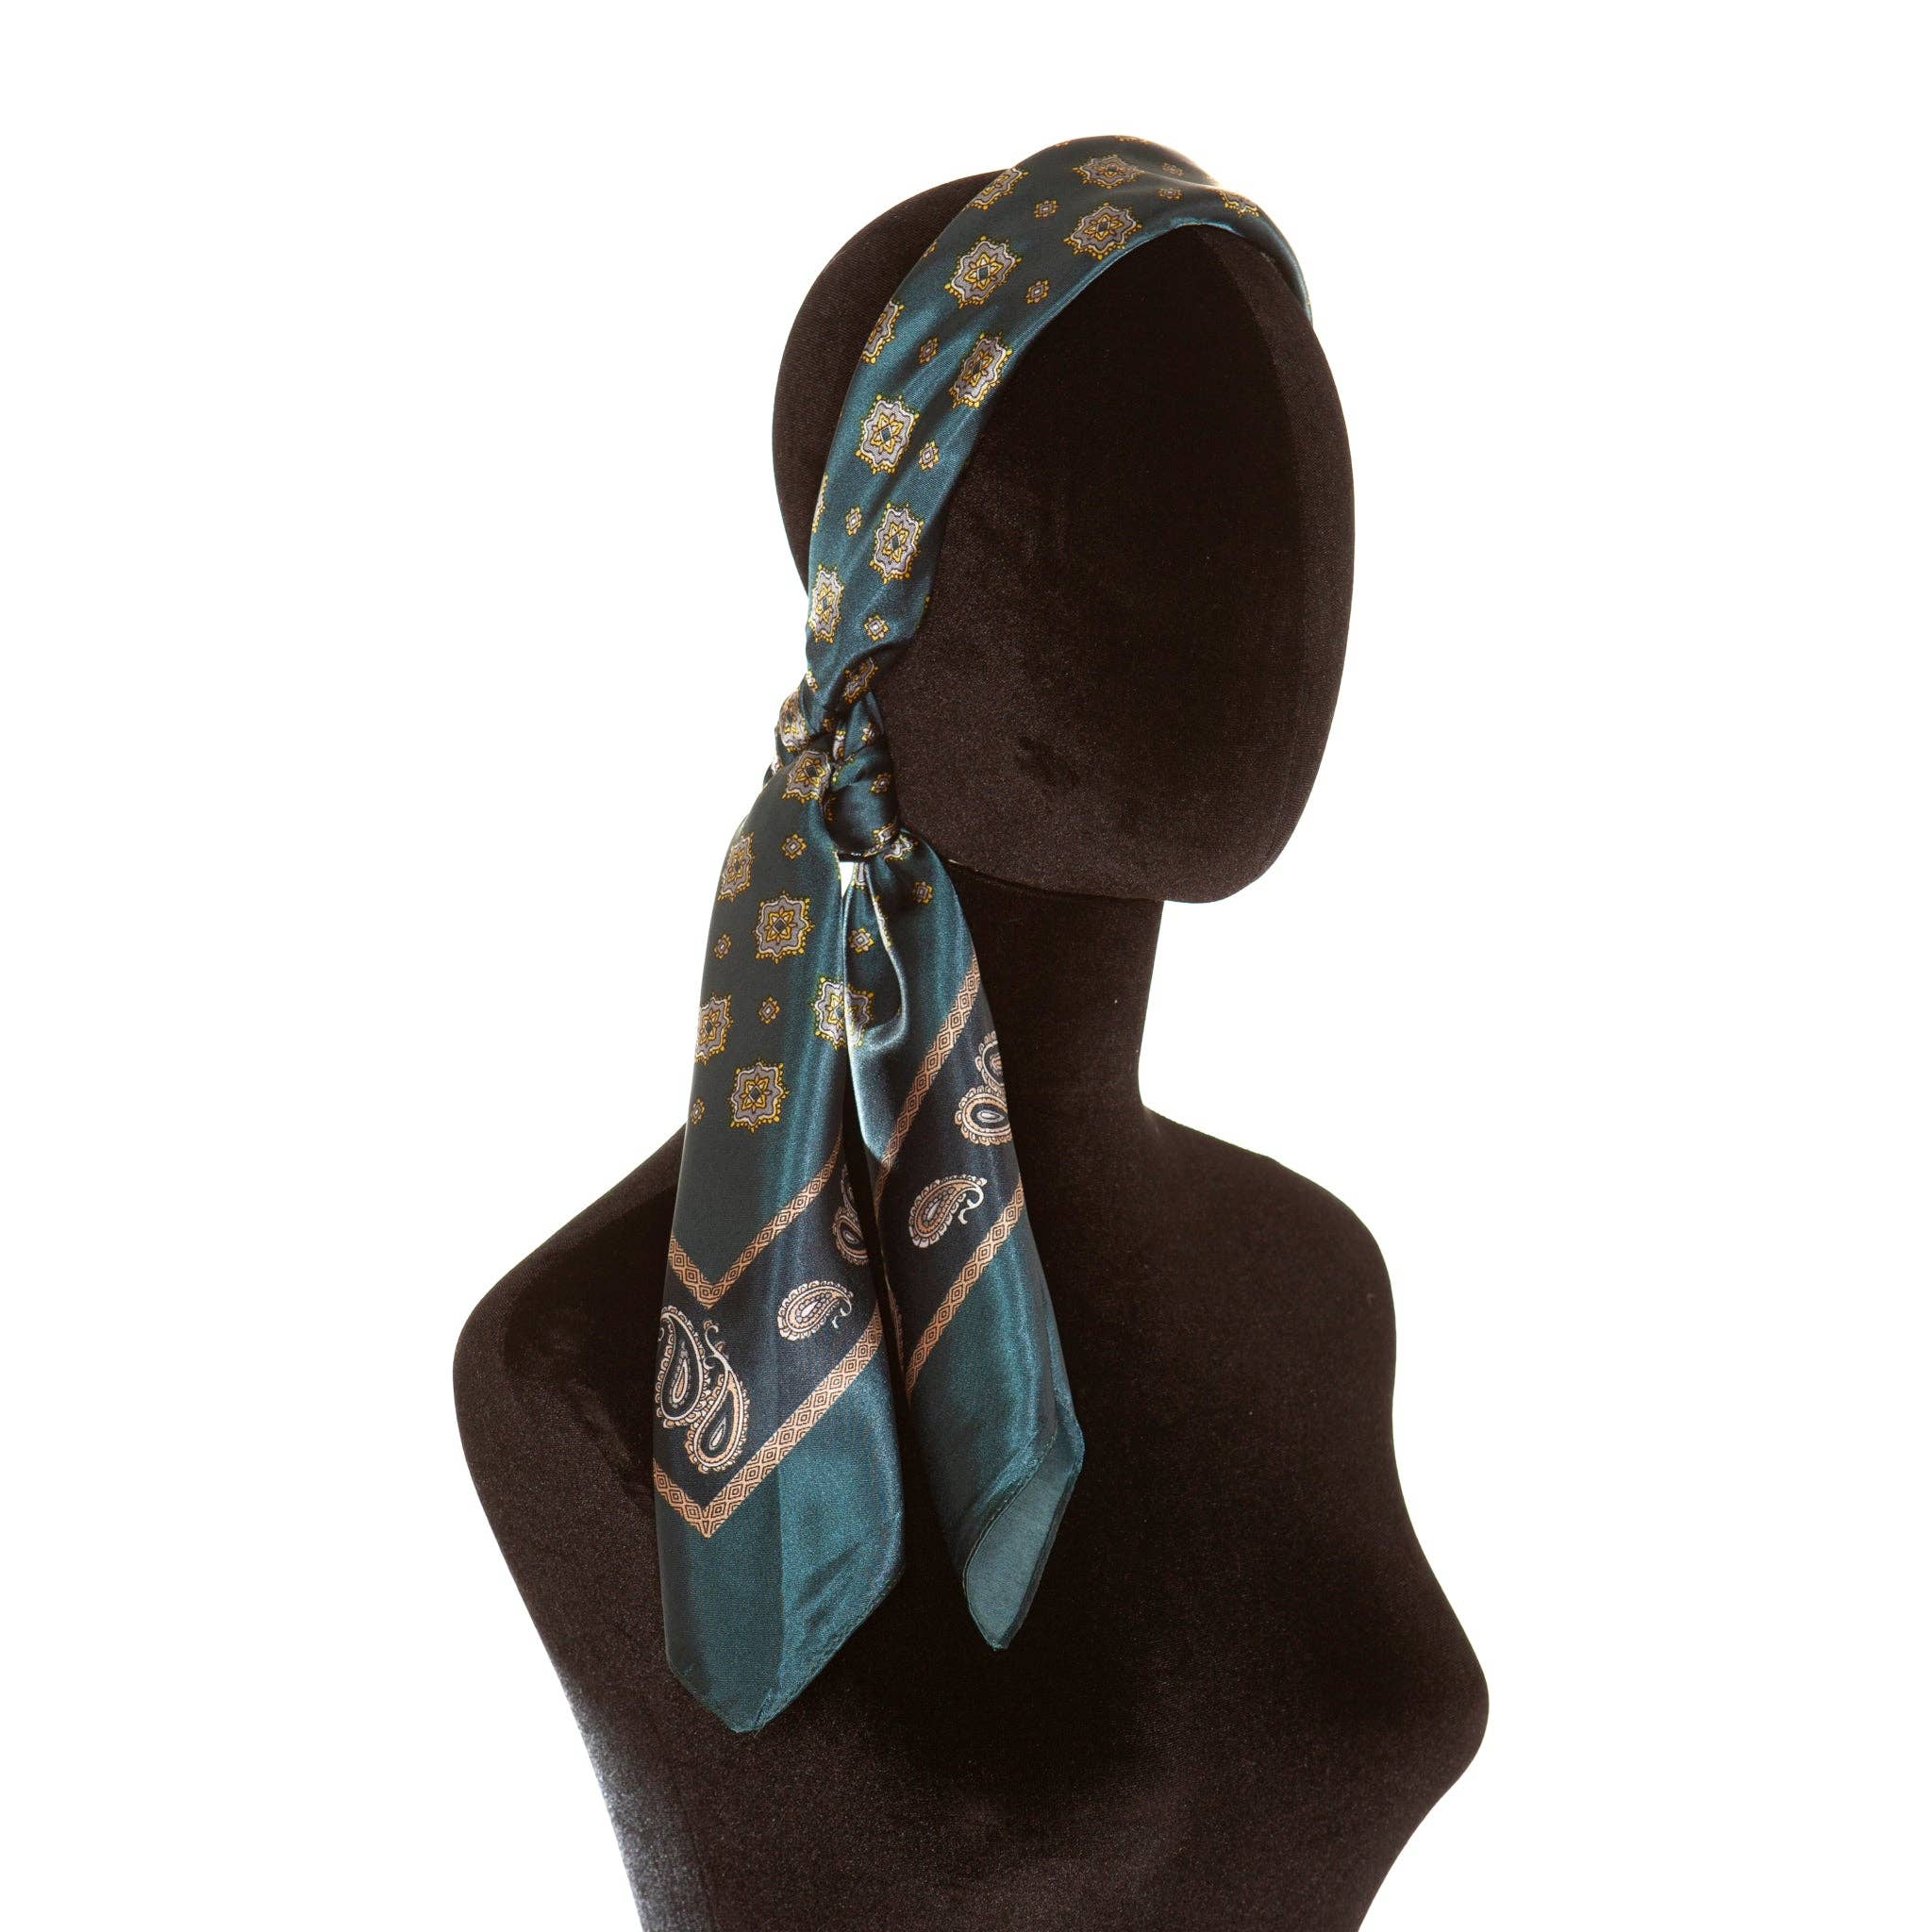 Buy Blue & Red Stoles & Scarves for Women by MATCHITT Online